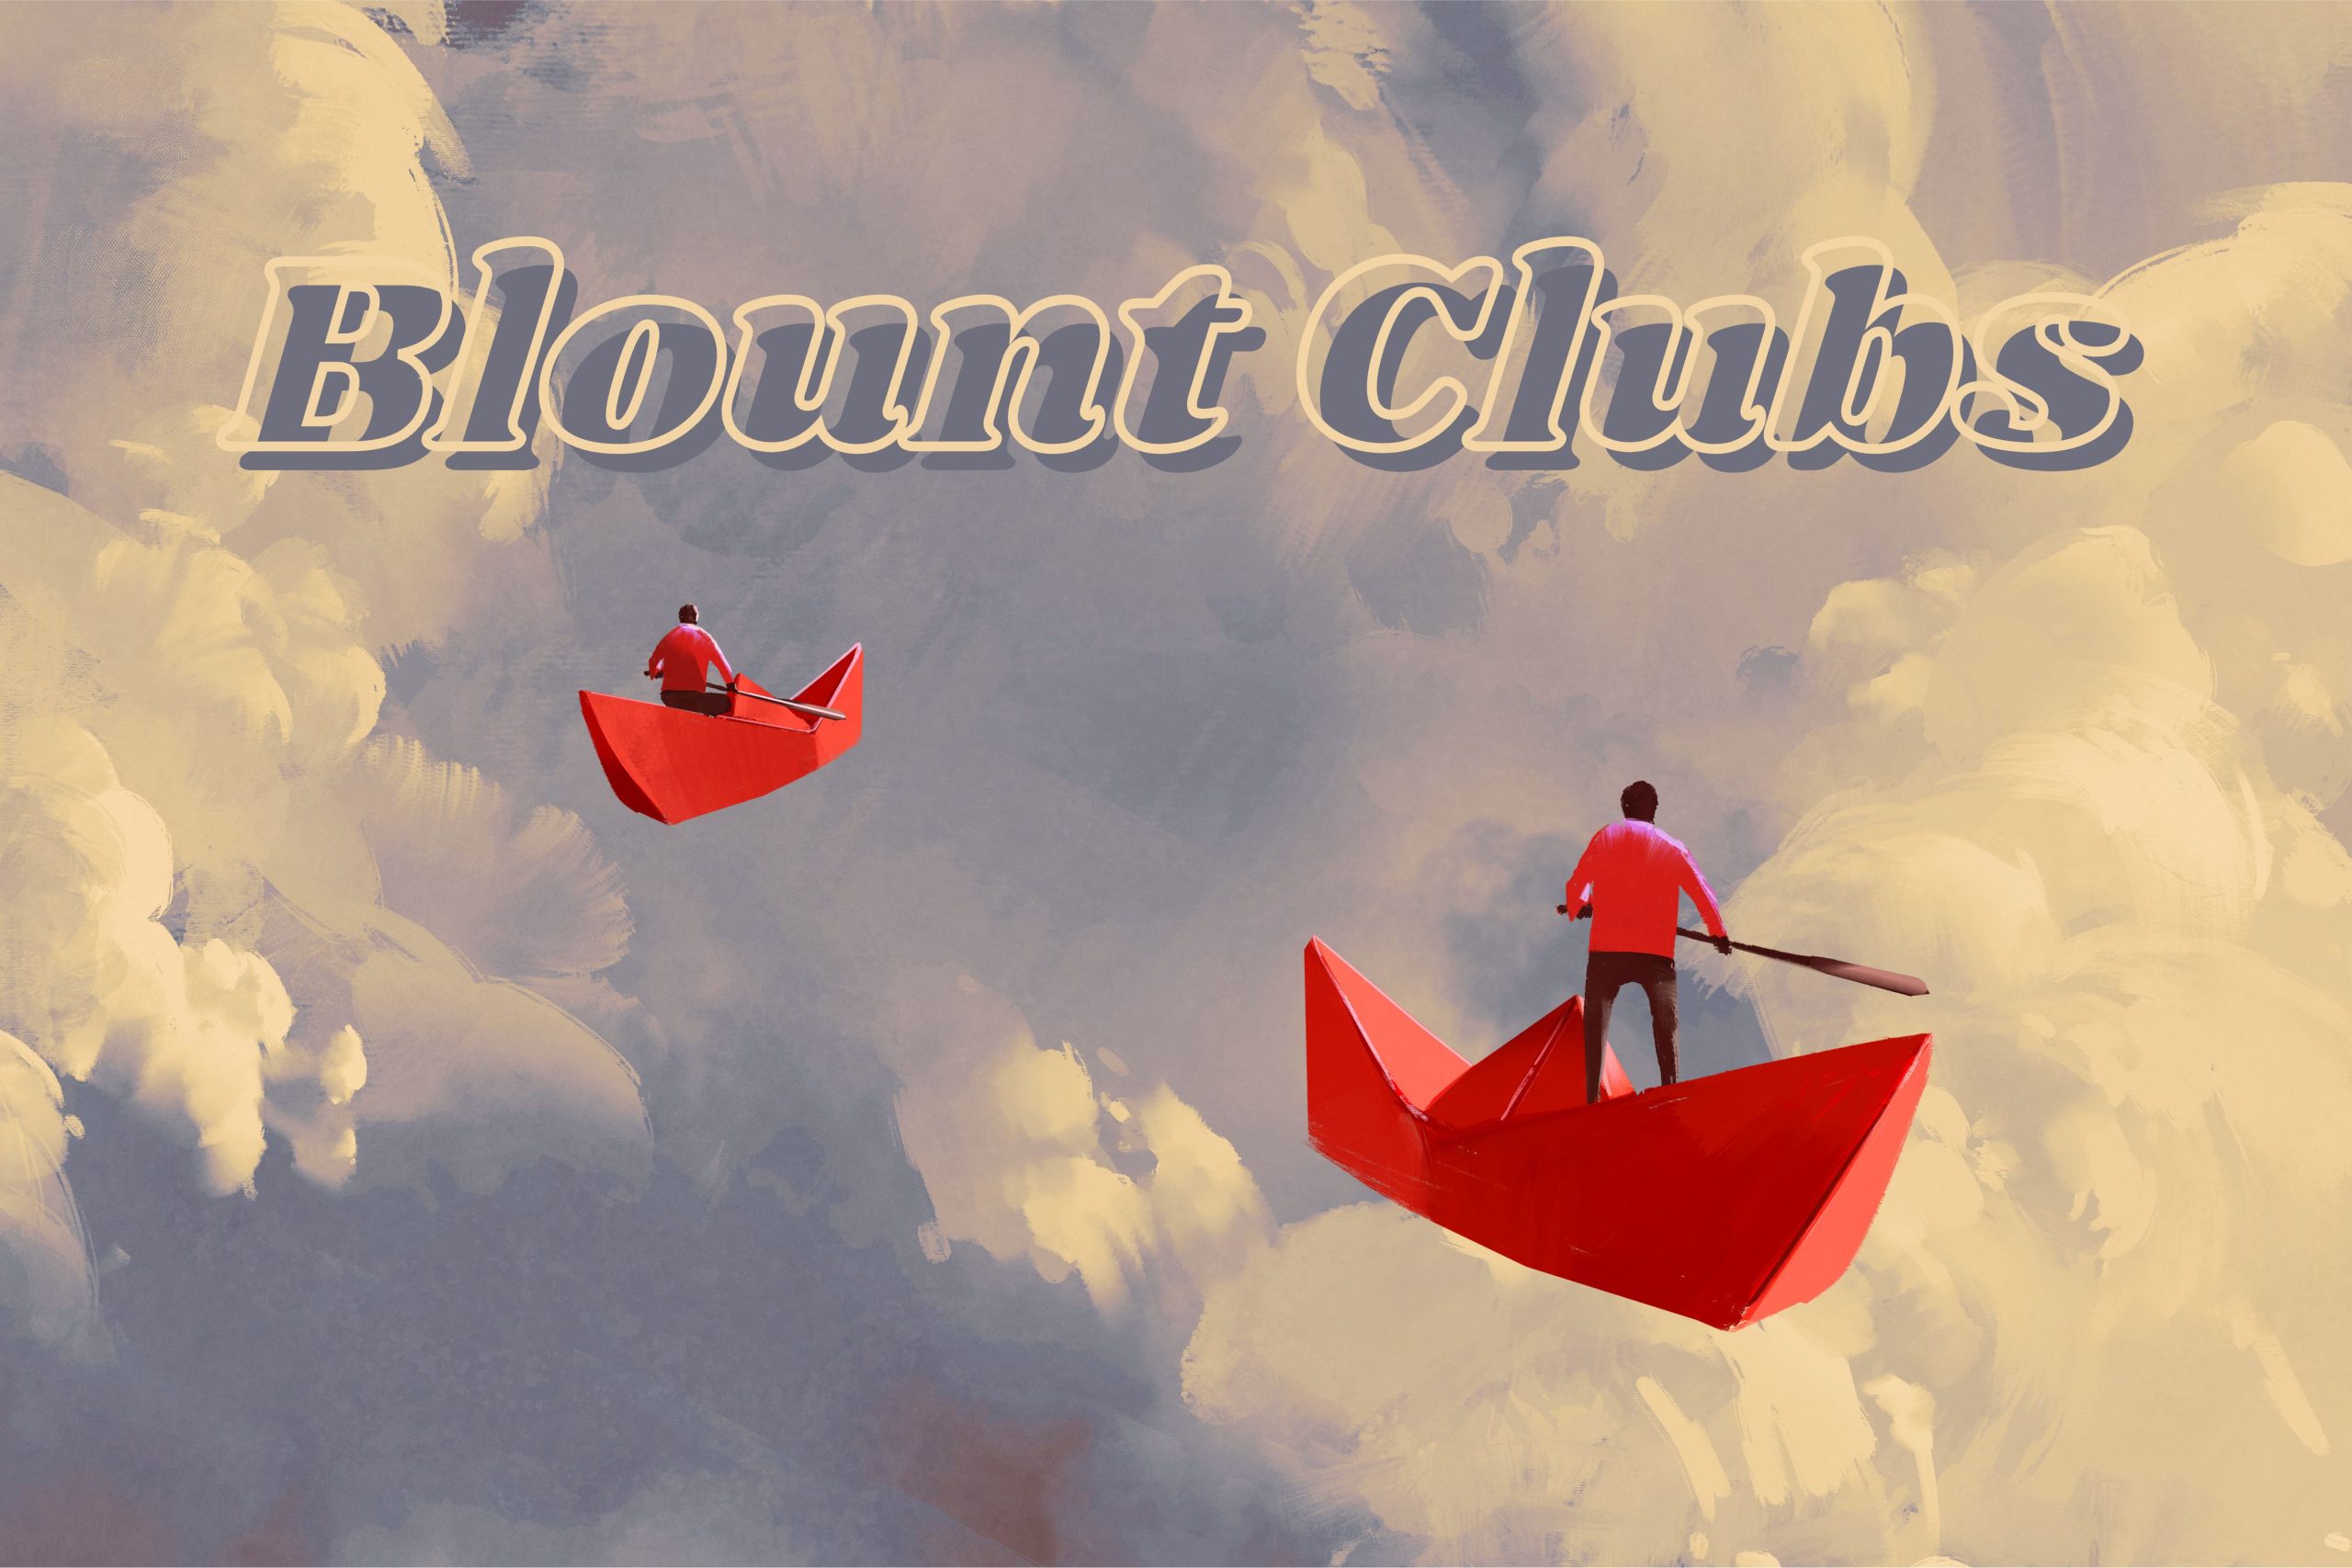 Illustration of people on origami boats with text "Blount Clubs"